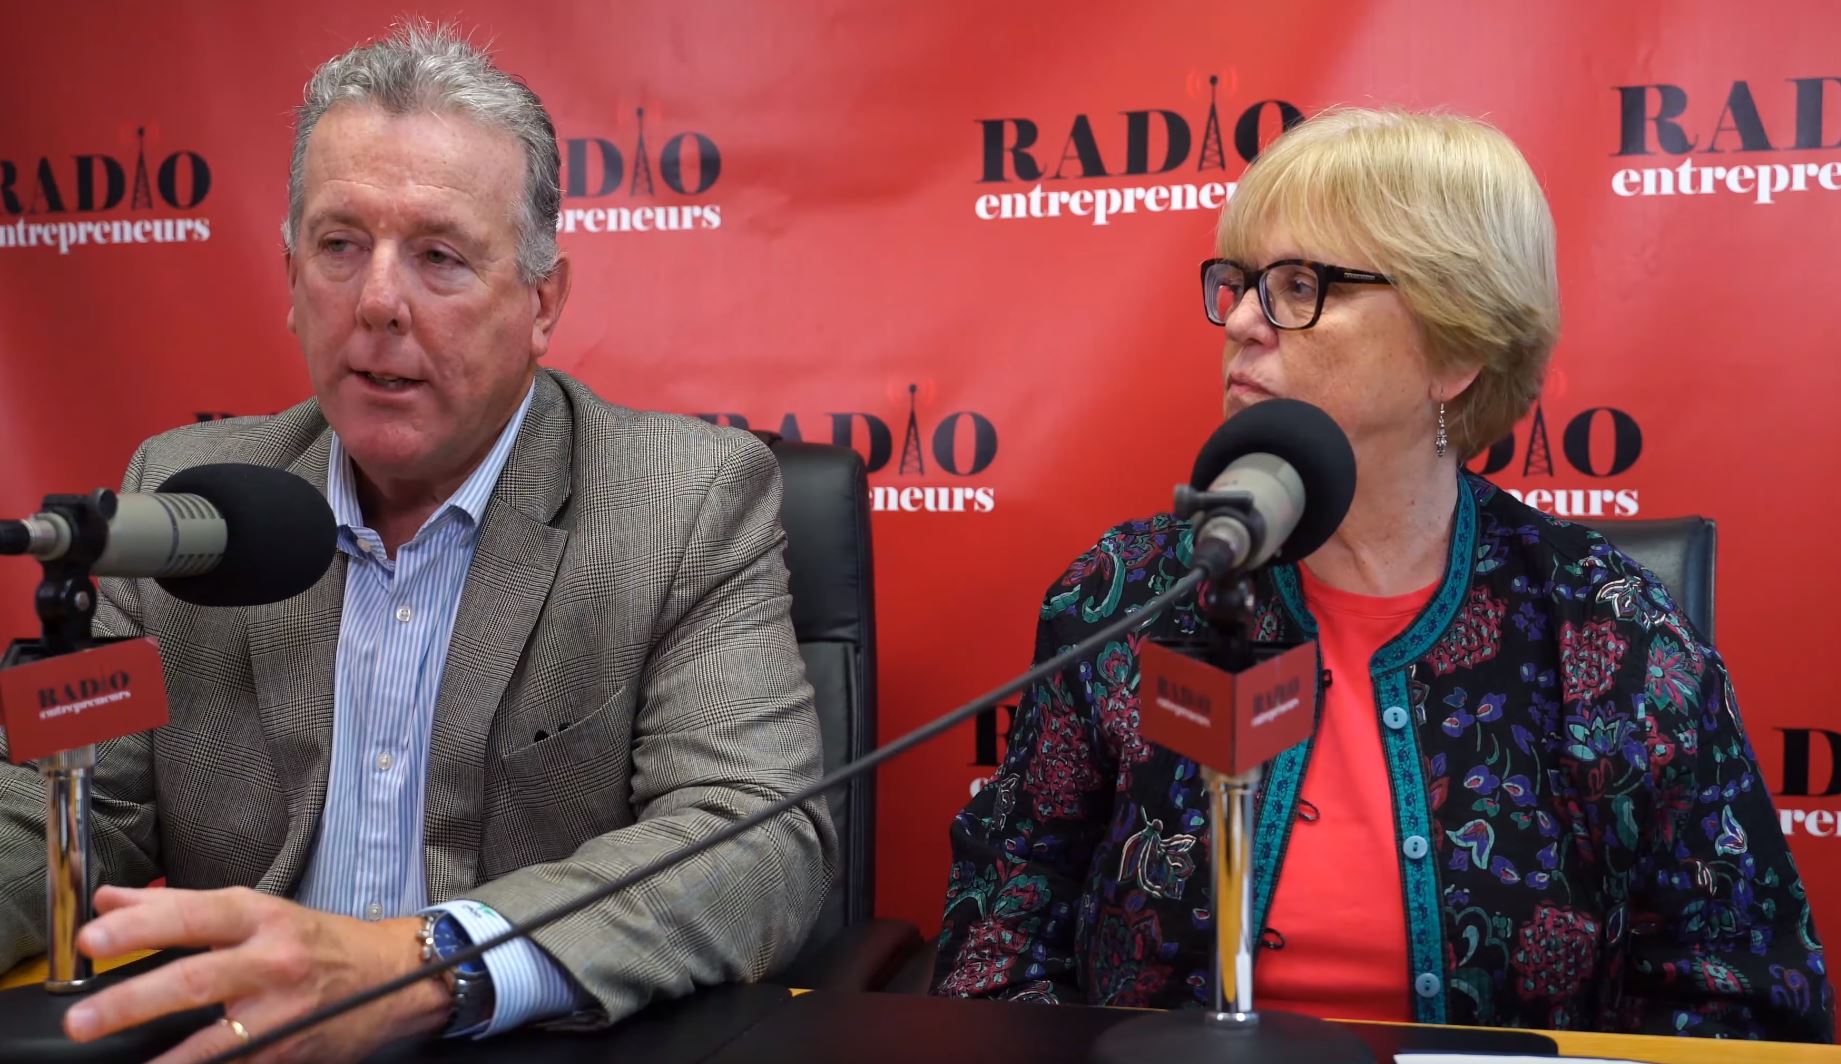 Barry Crimmins & Noreen O’Toole – Platinum Partners